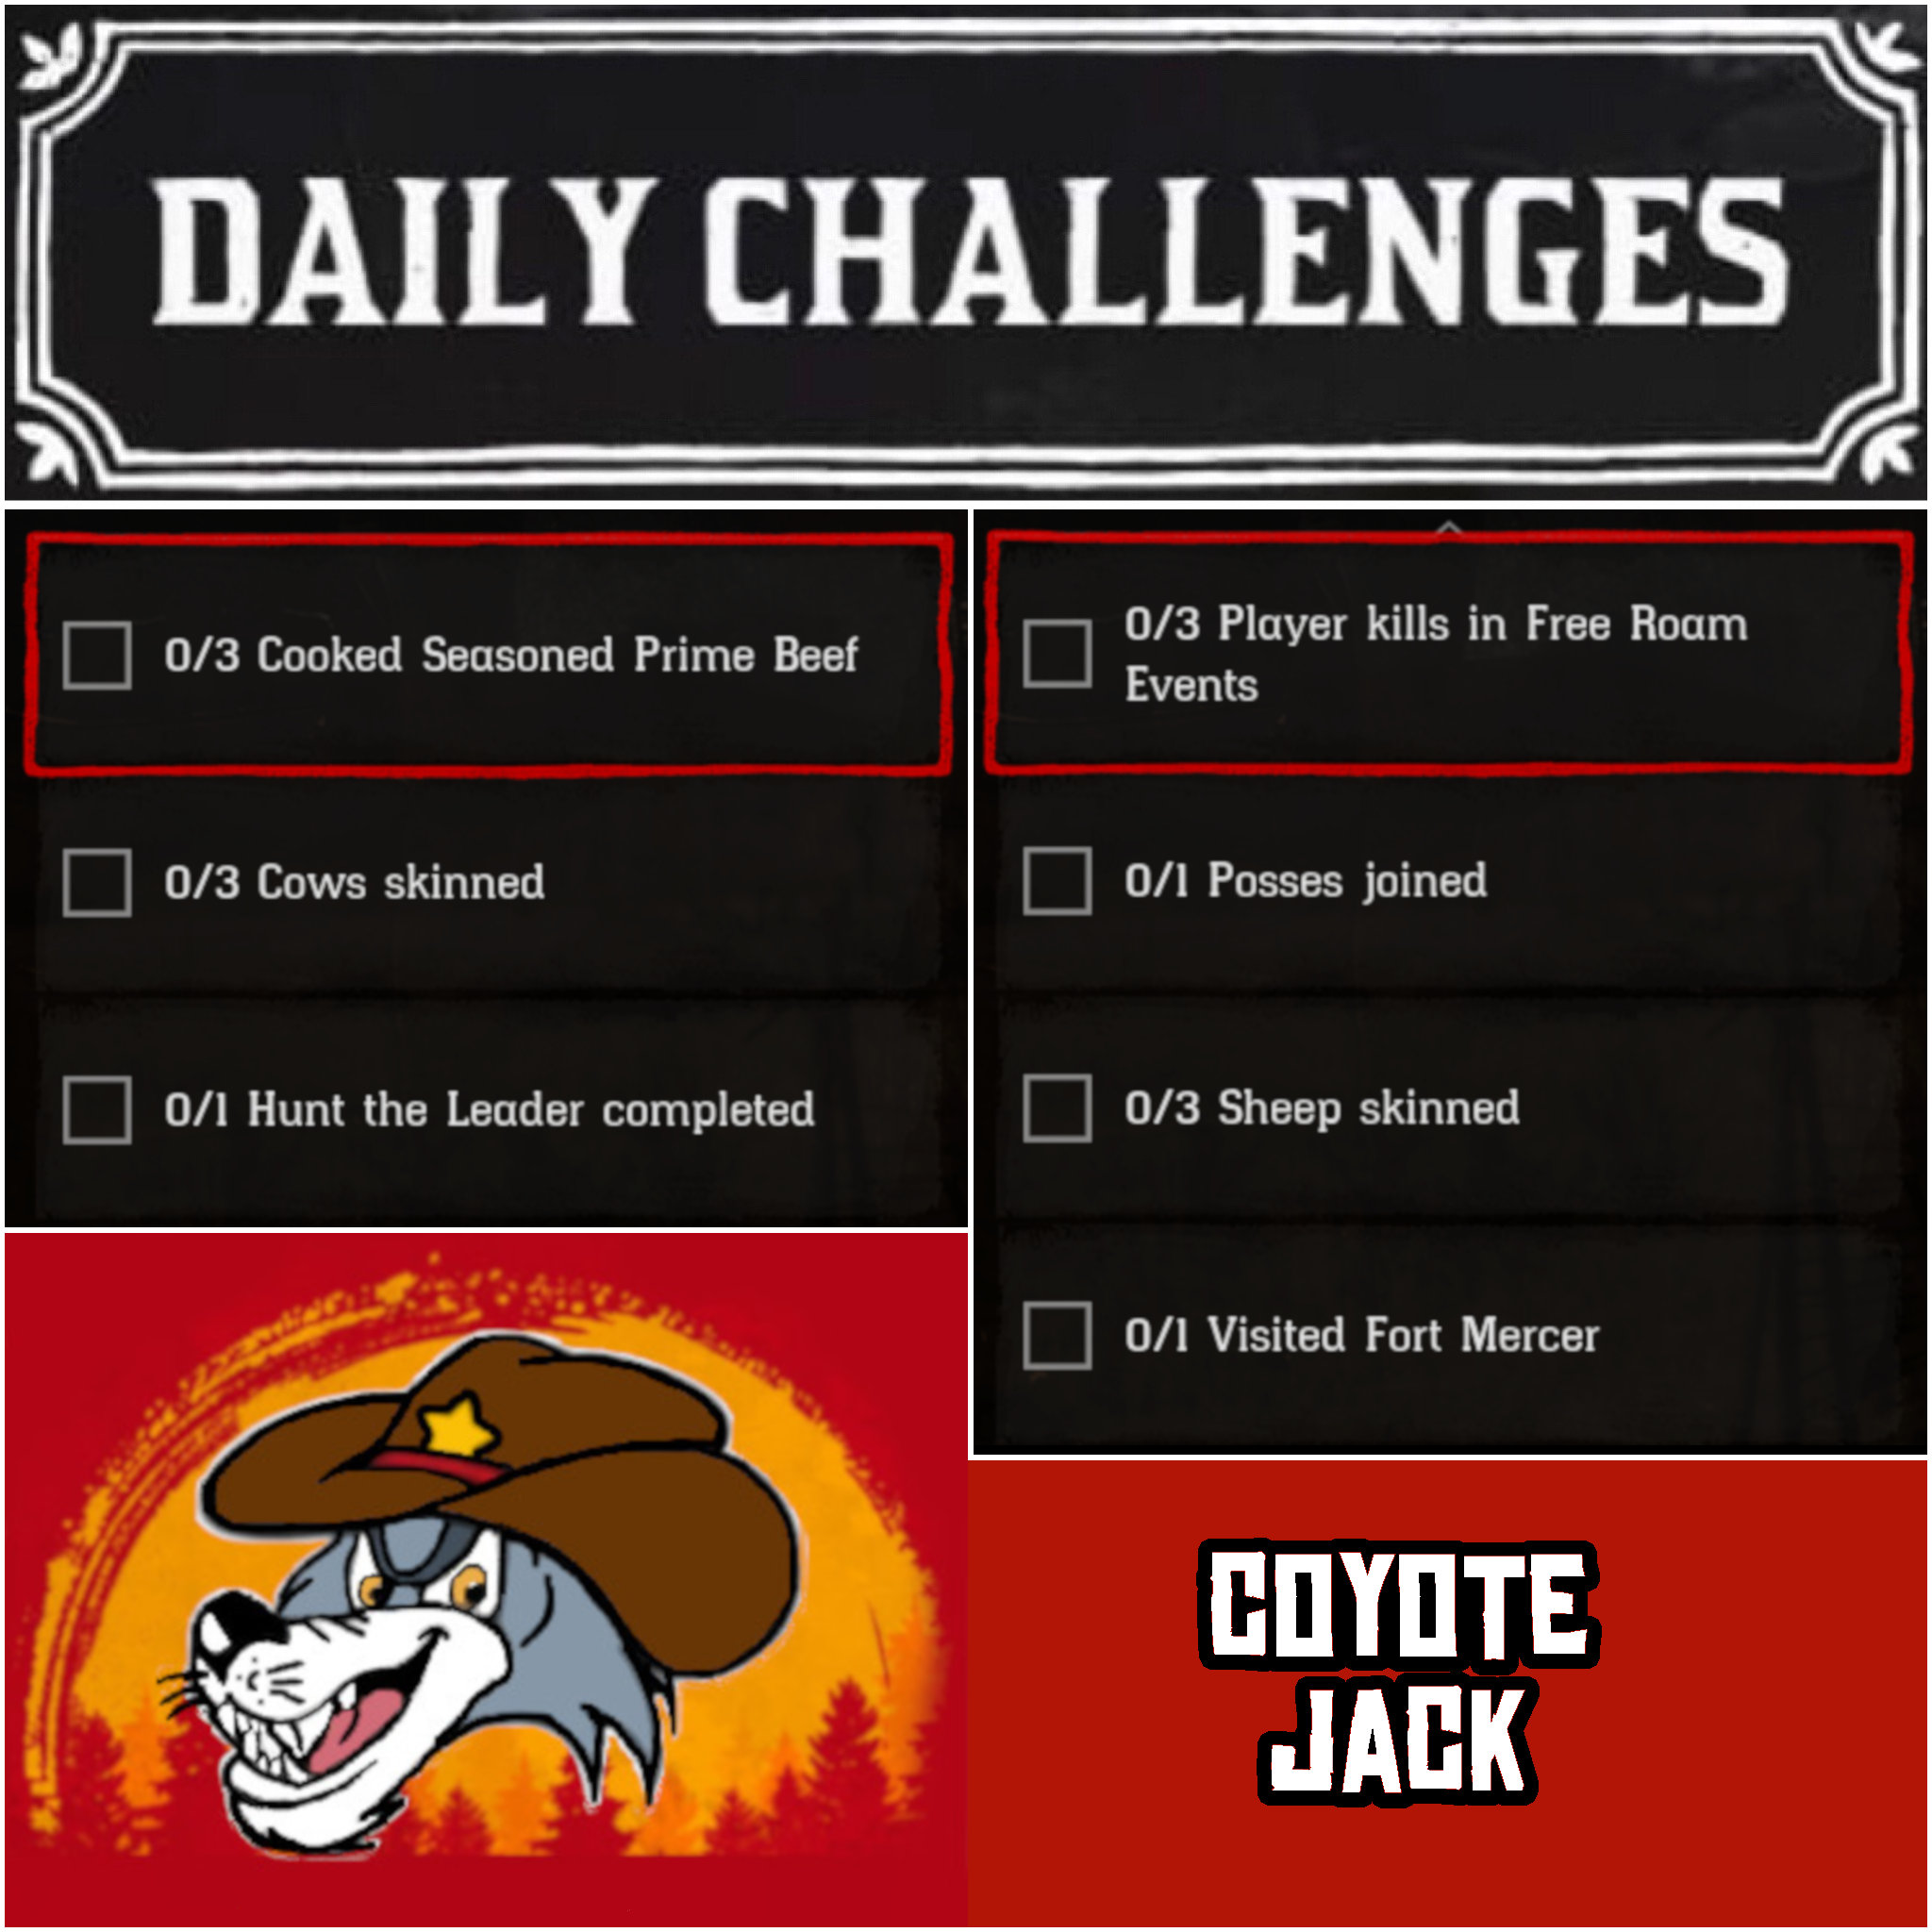 You are currently viewing Monday 18 January Daily Challenges